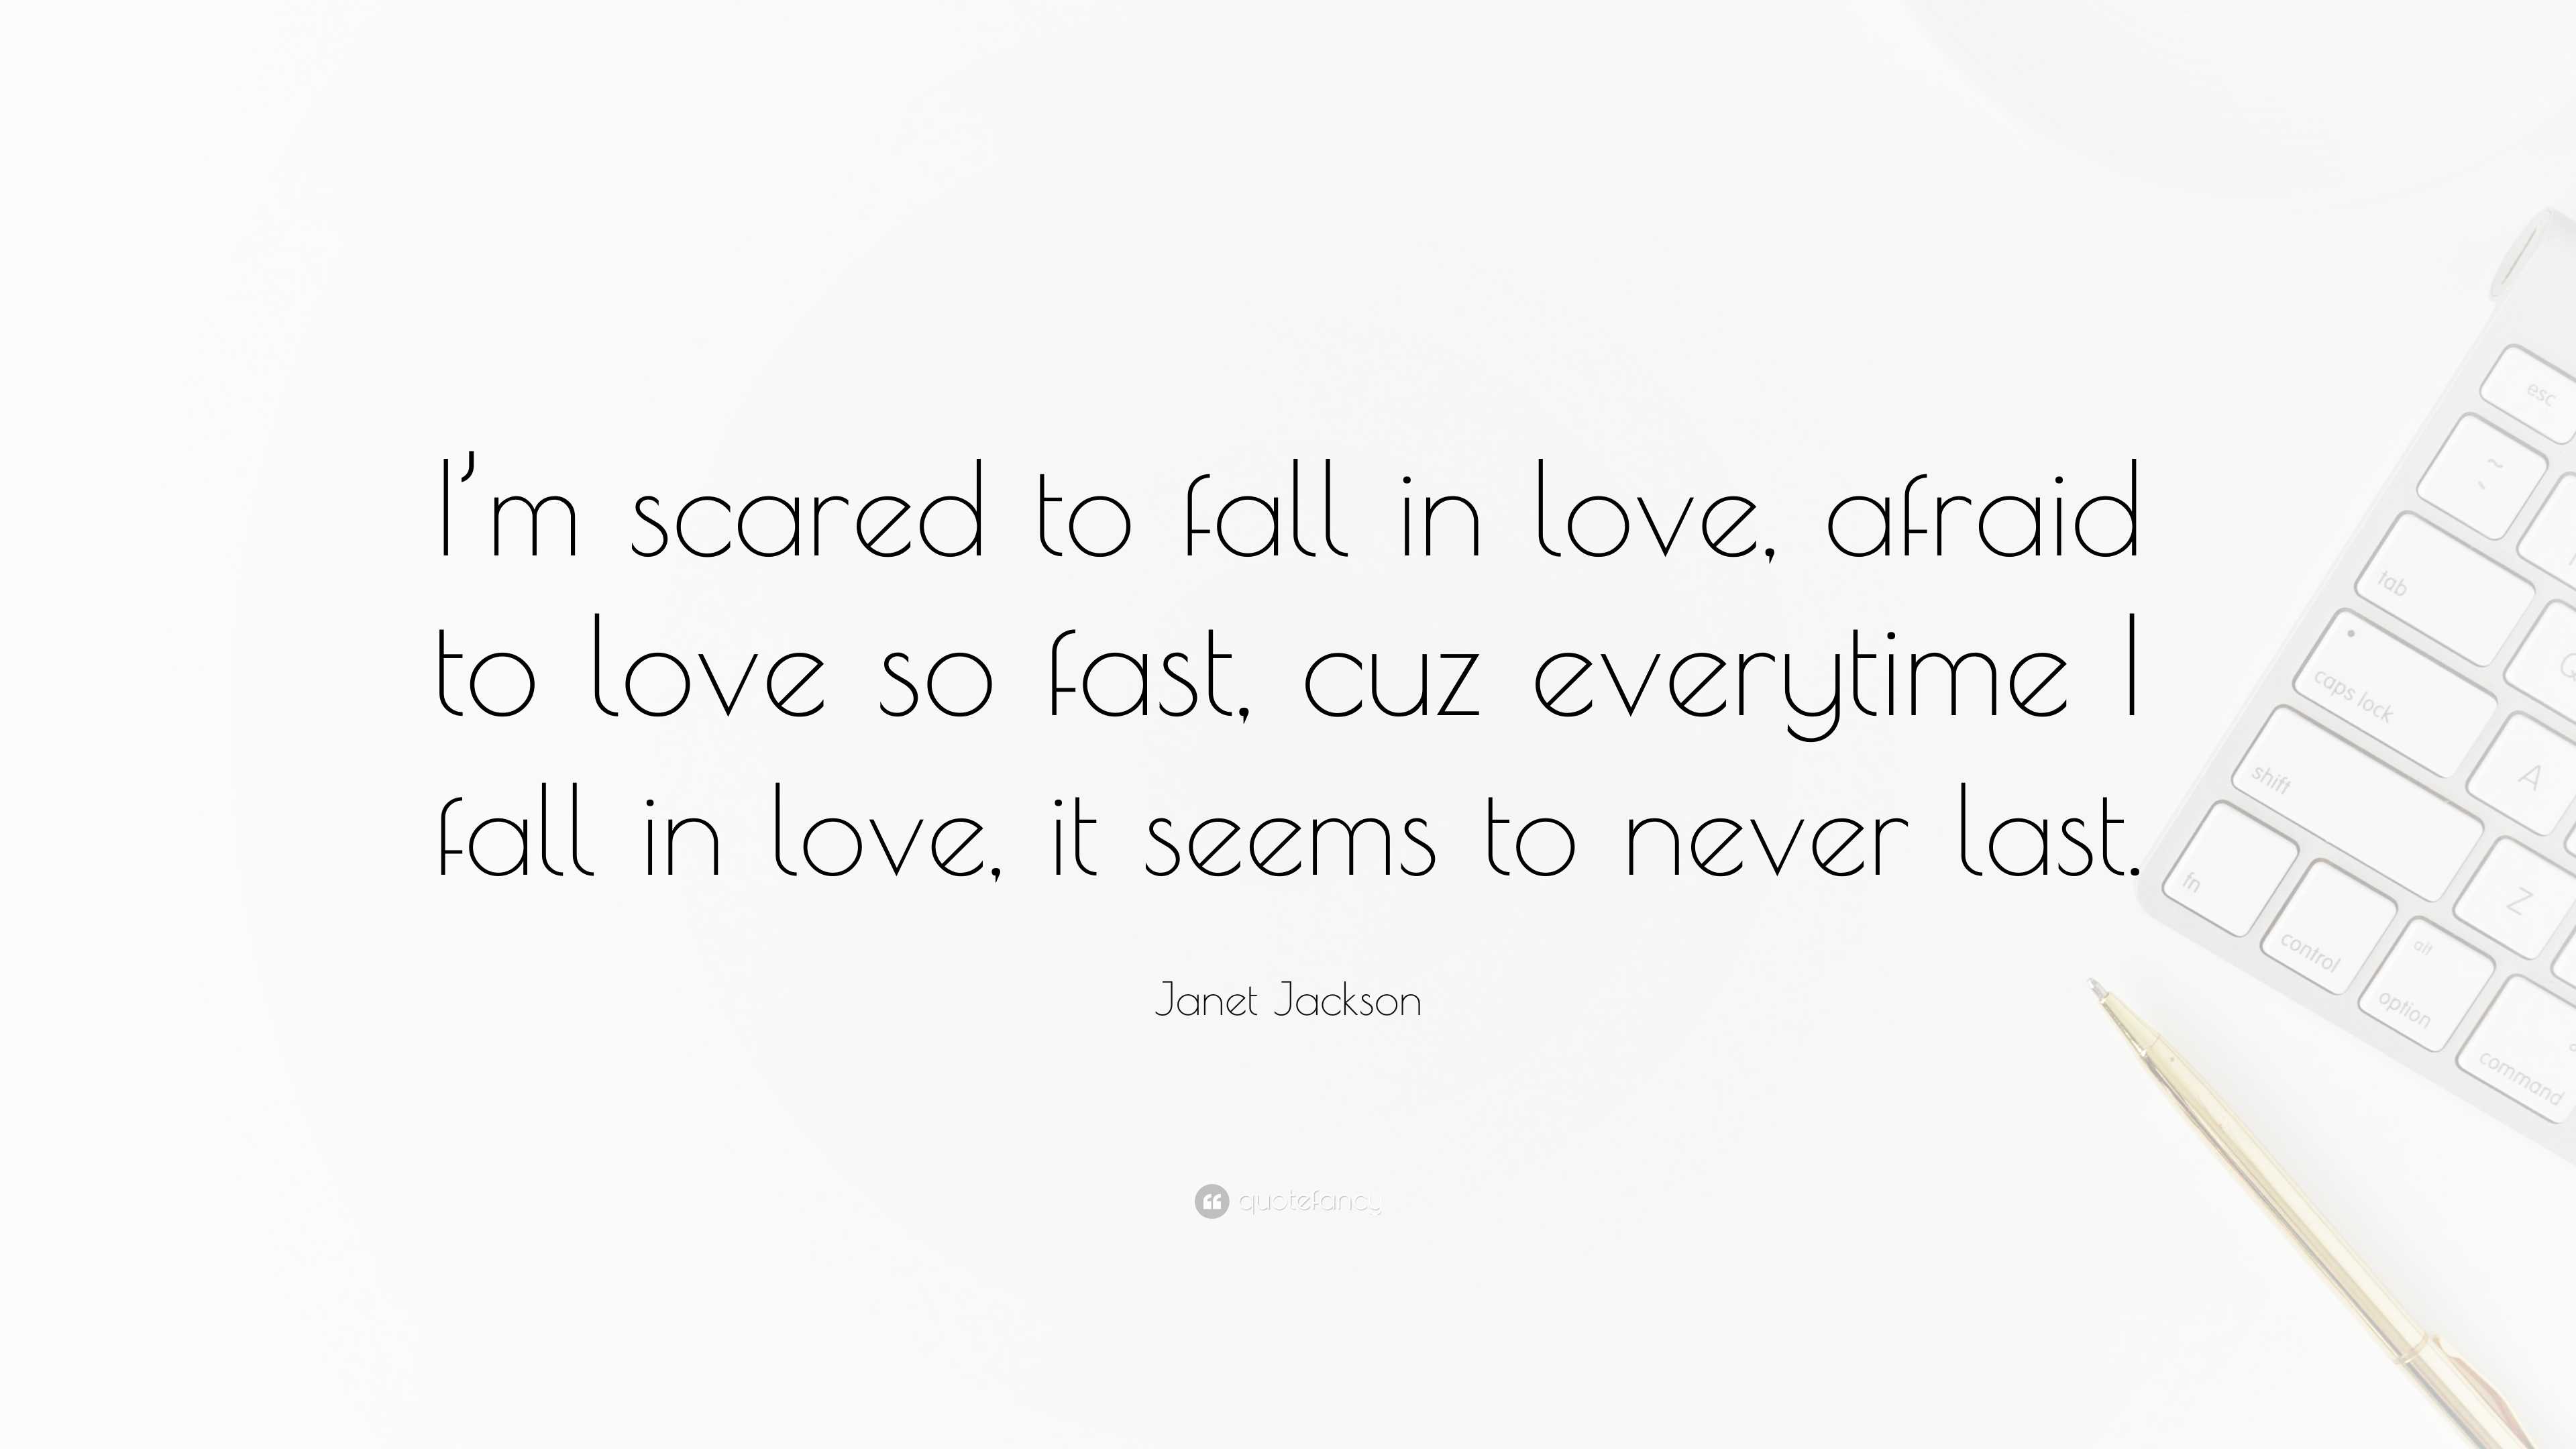 Janet Jackson Quote: “I'm scared to fall in love, afraid to love